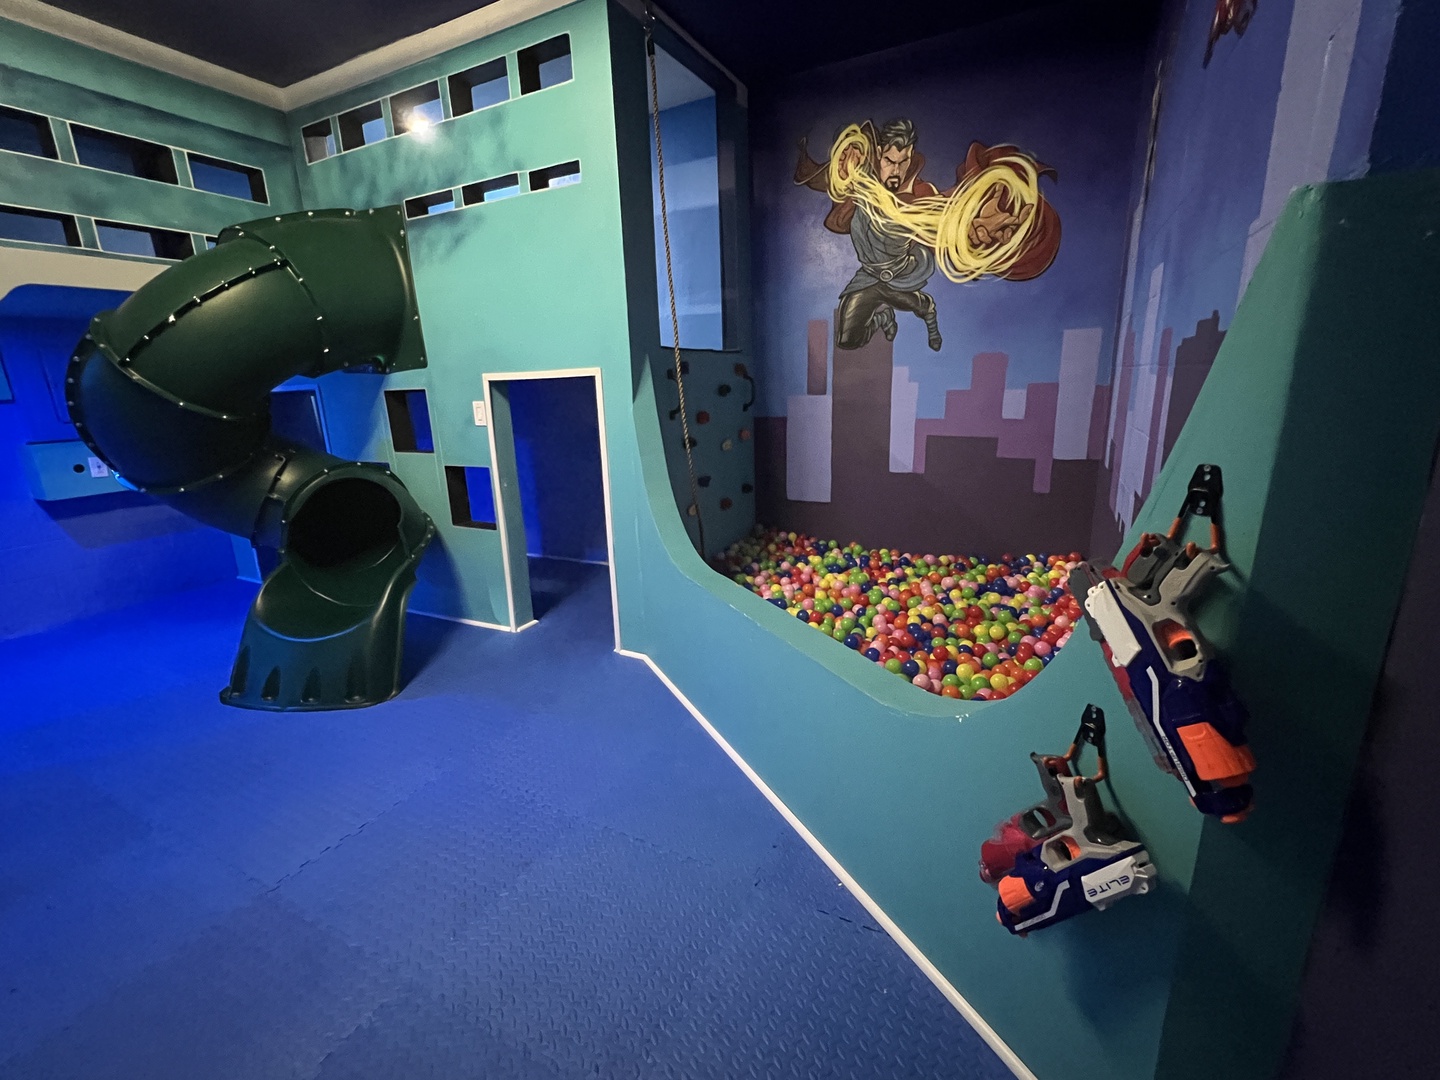 Avengers garage playroom with slide, ball pit, and rock climbing wall